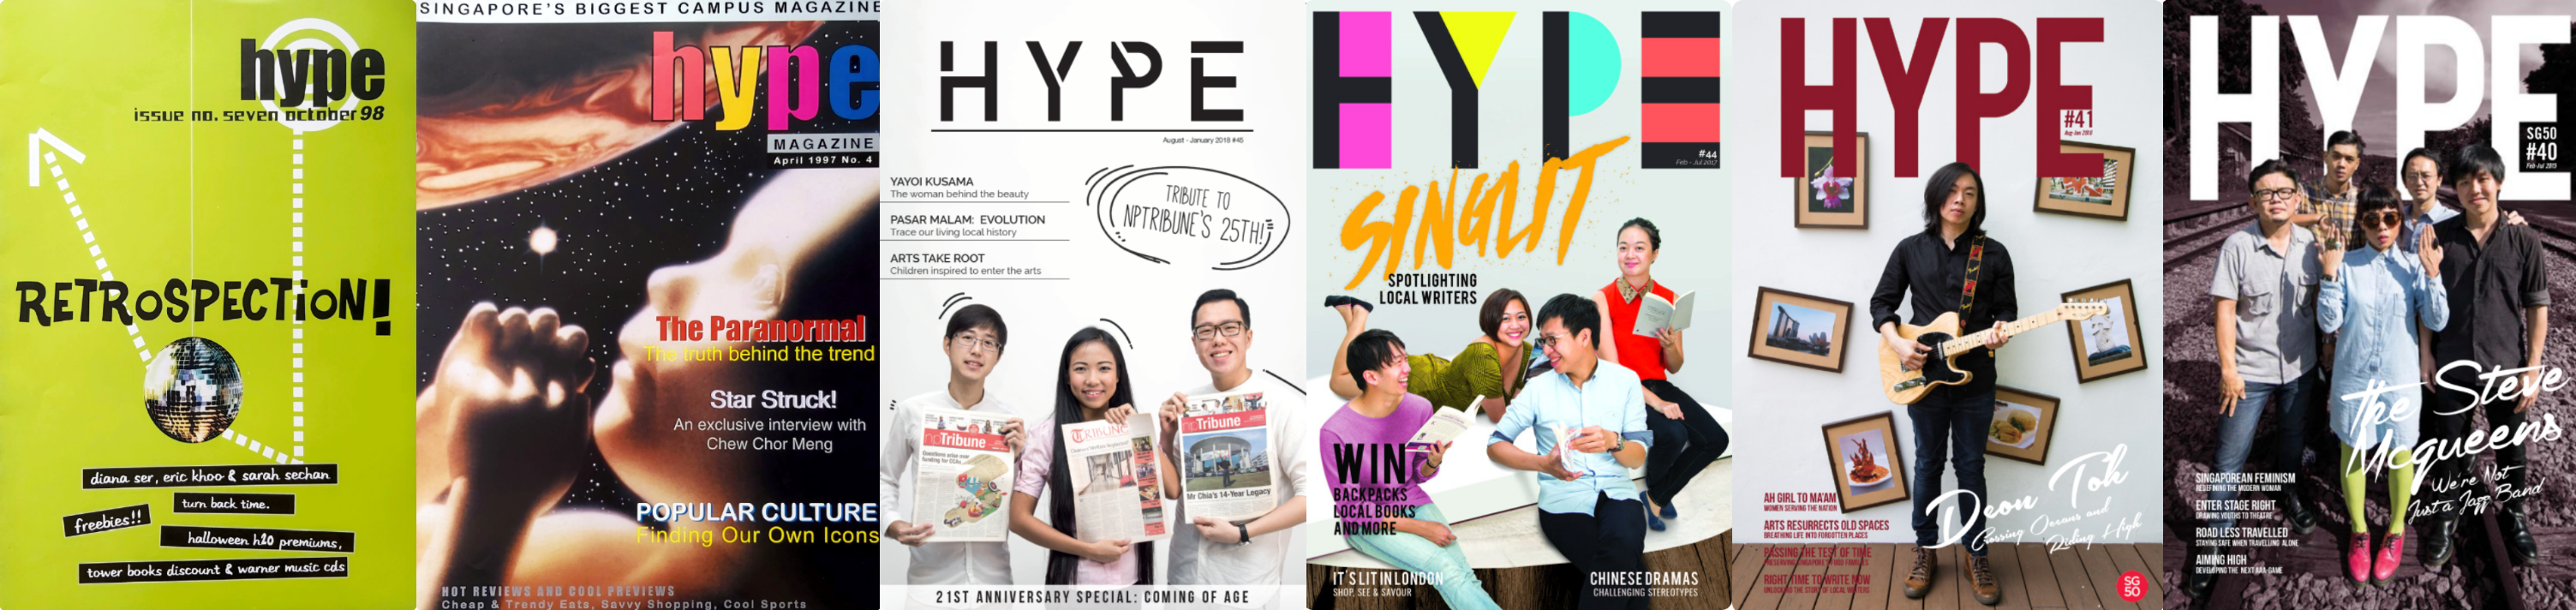 hype-magazine-ngee-ann-polytechnic-archive